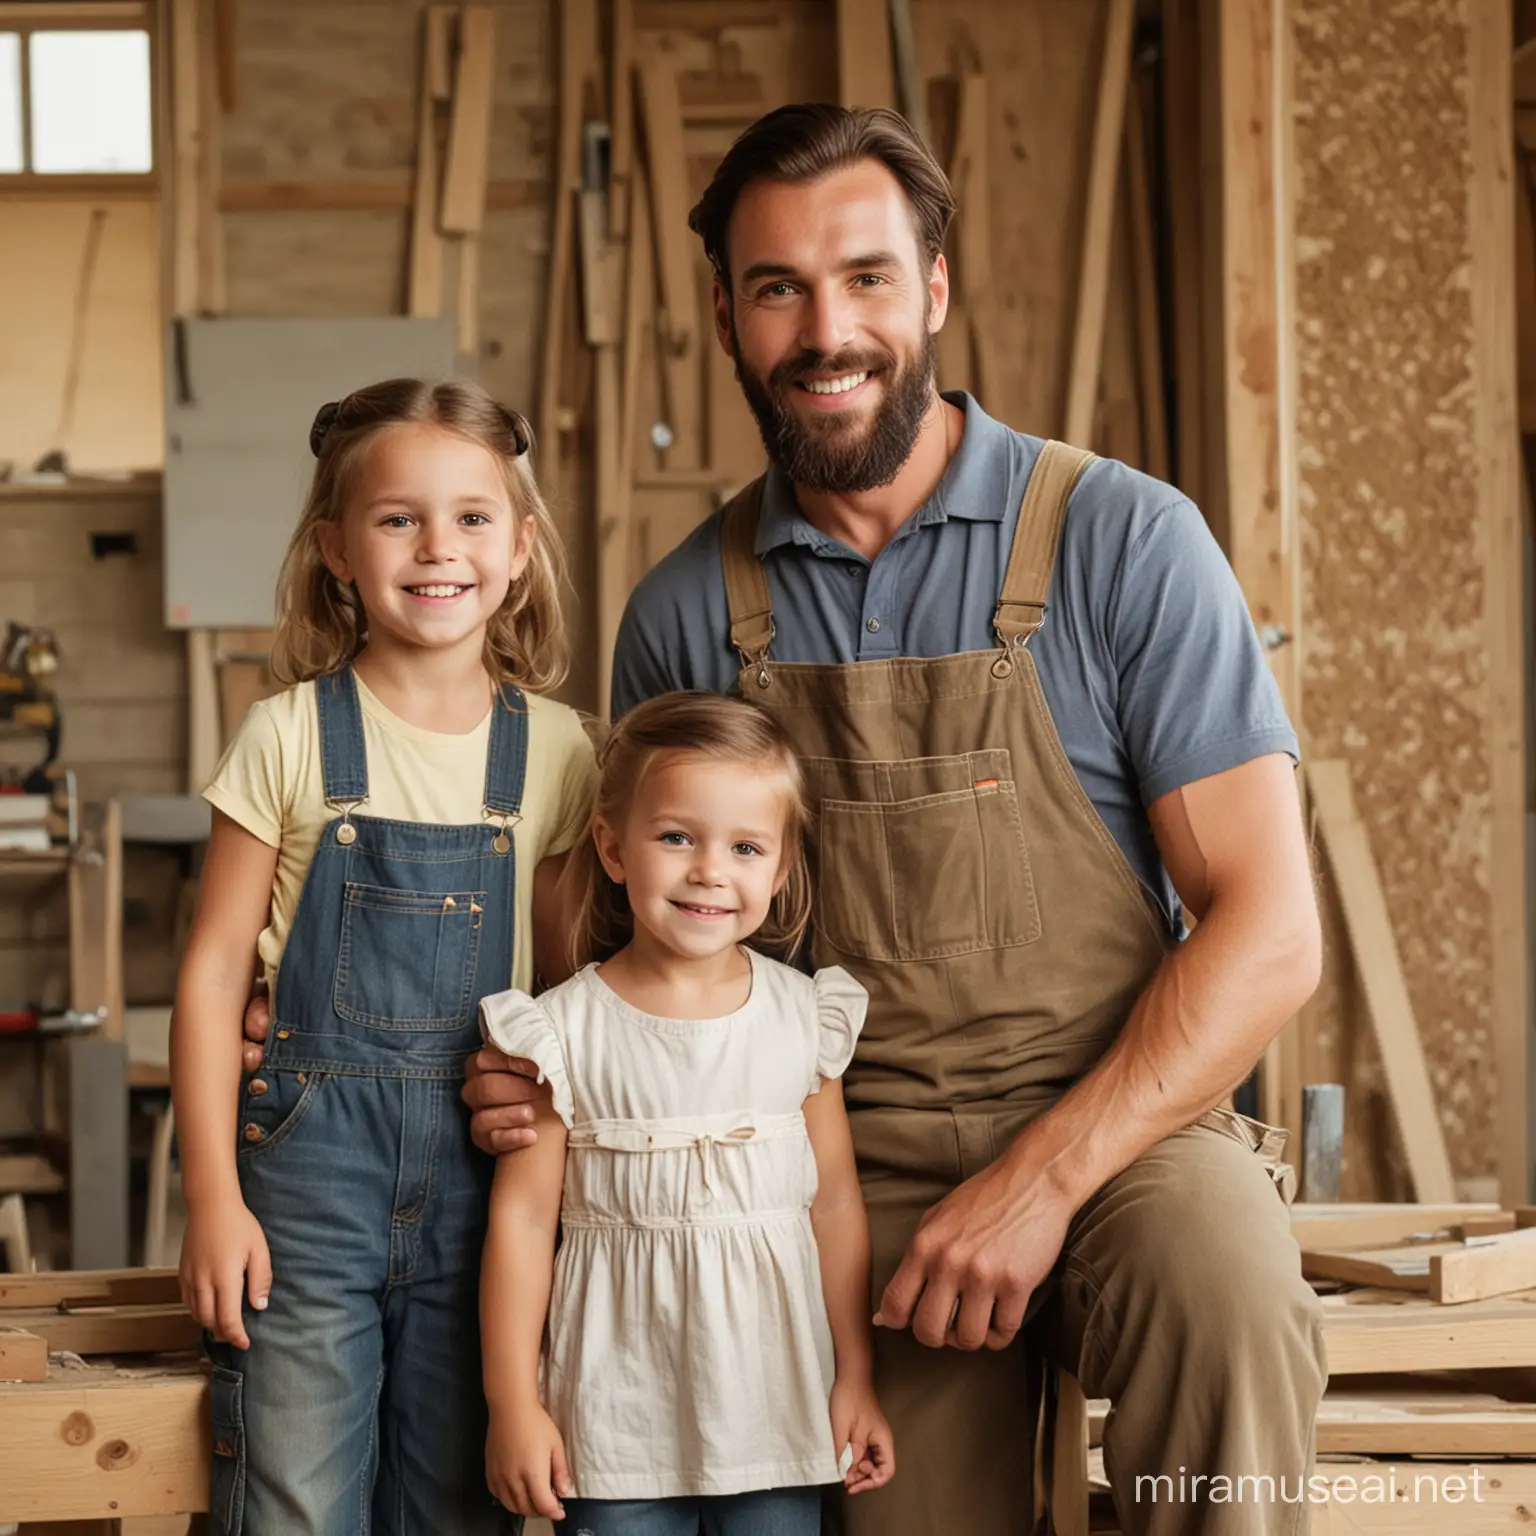 a carpenter man in his 25-30's with his 4 year old daughter and 6 year old son